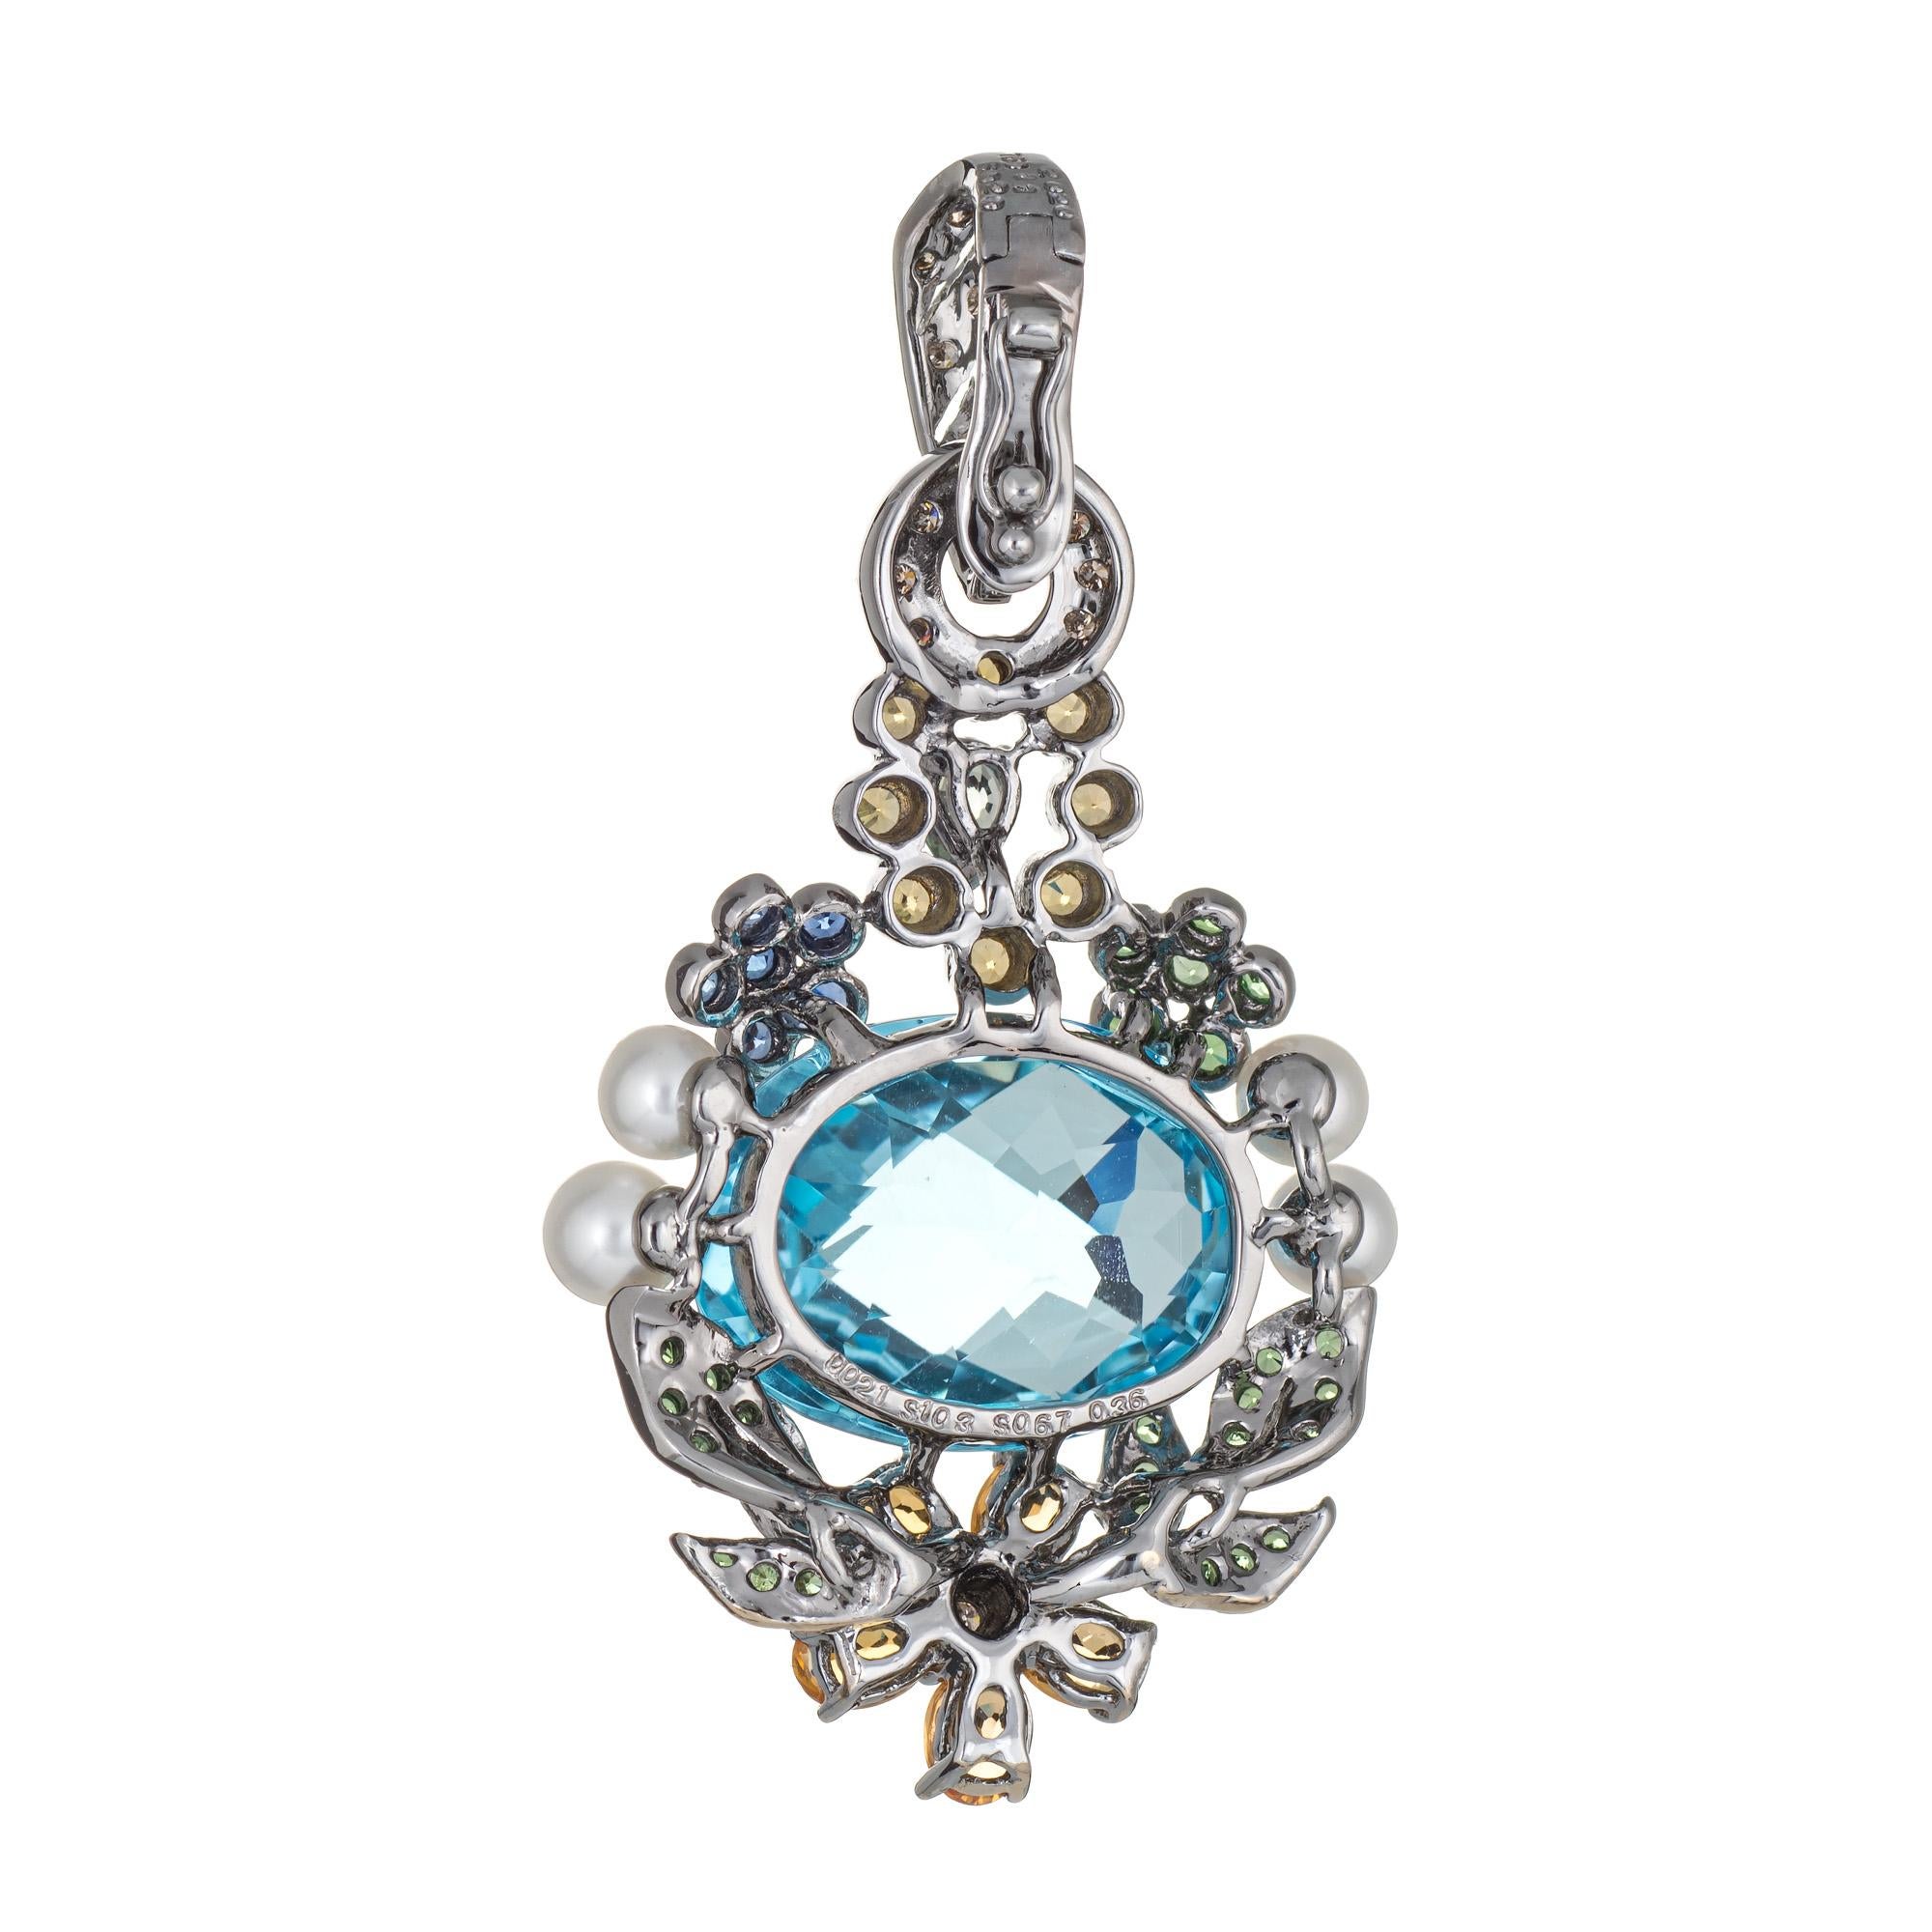 Finely detailed estate pendant set with blue topaz, diamonds & multi gemstones crafted in 18k oxidized white gold.  

Centrally mounted checkerboard faceted blue topaz measures 17mm x 13mm (estimated at 17 carats). The diamonds total an estimated